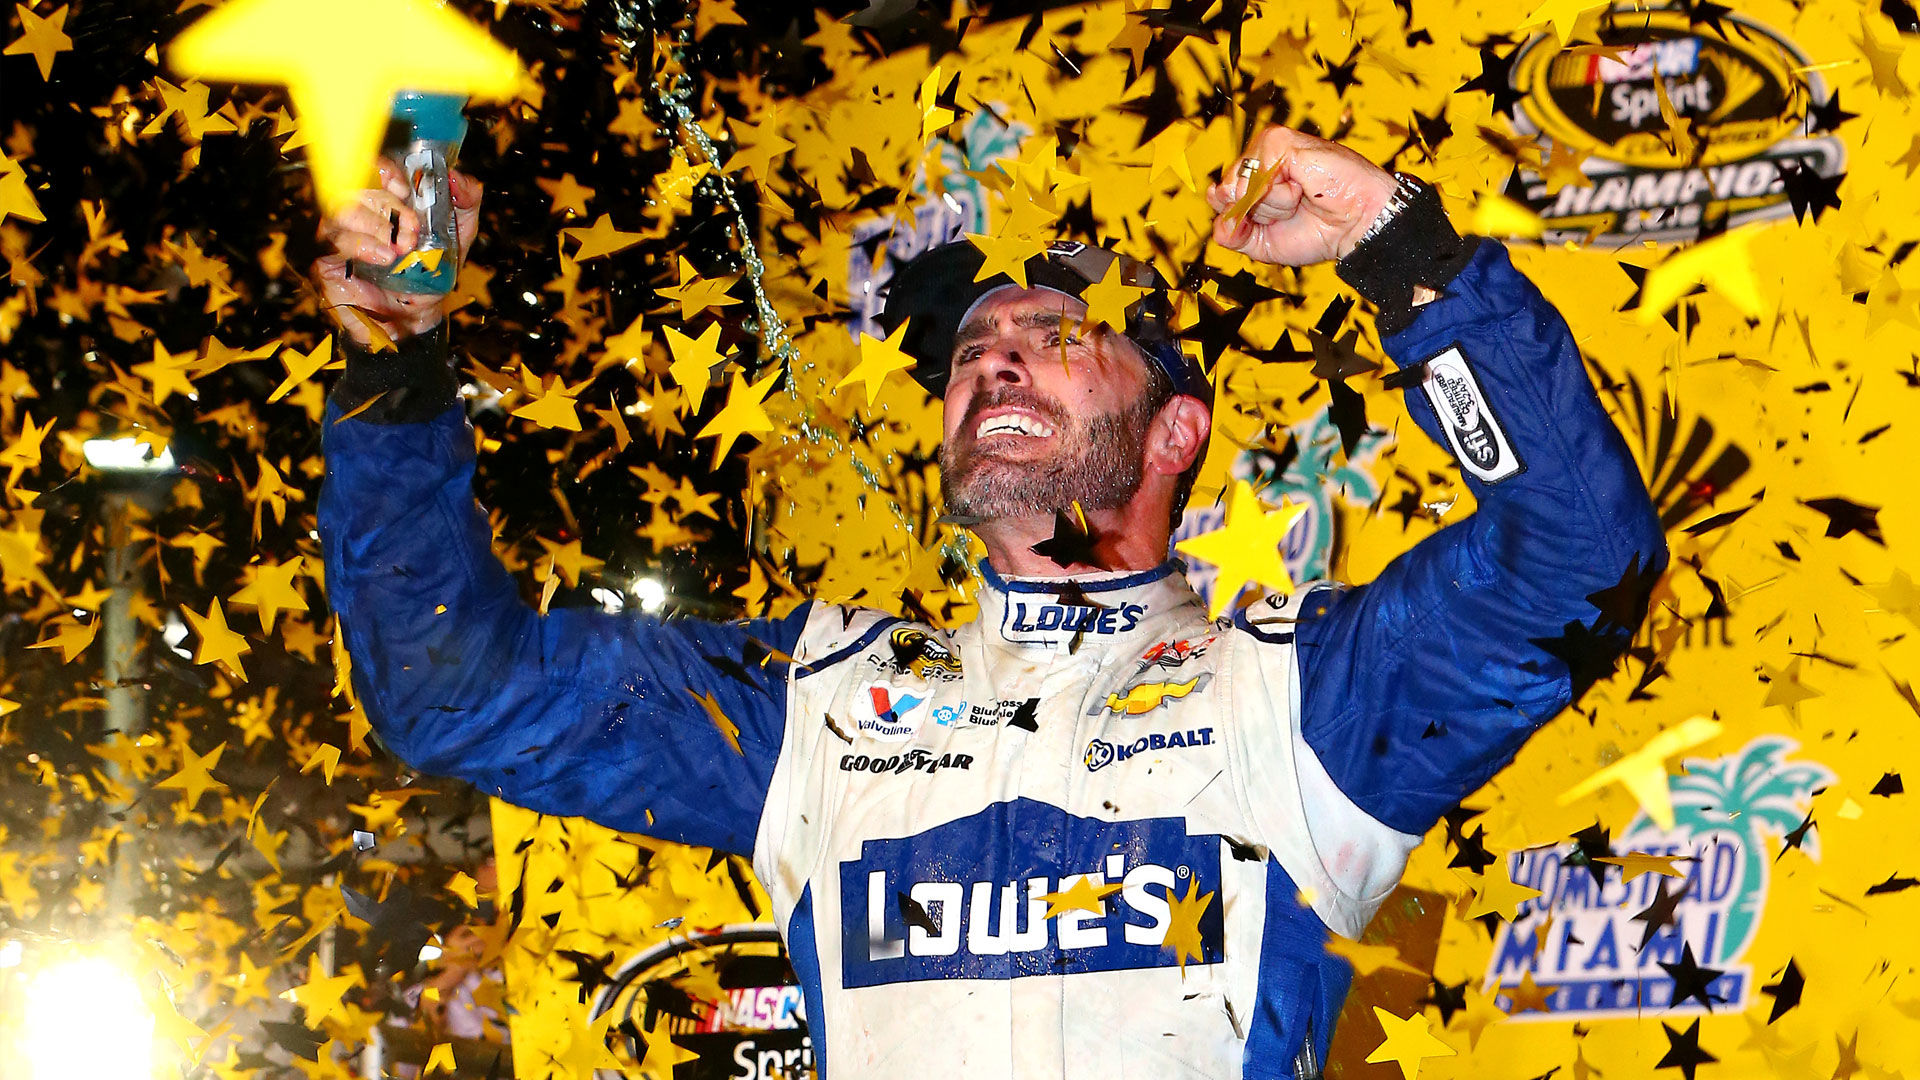 Johnson Ties Earnhardt Petty For Most Nascar Championship Wins